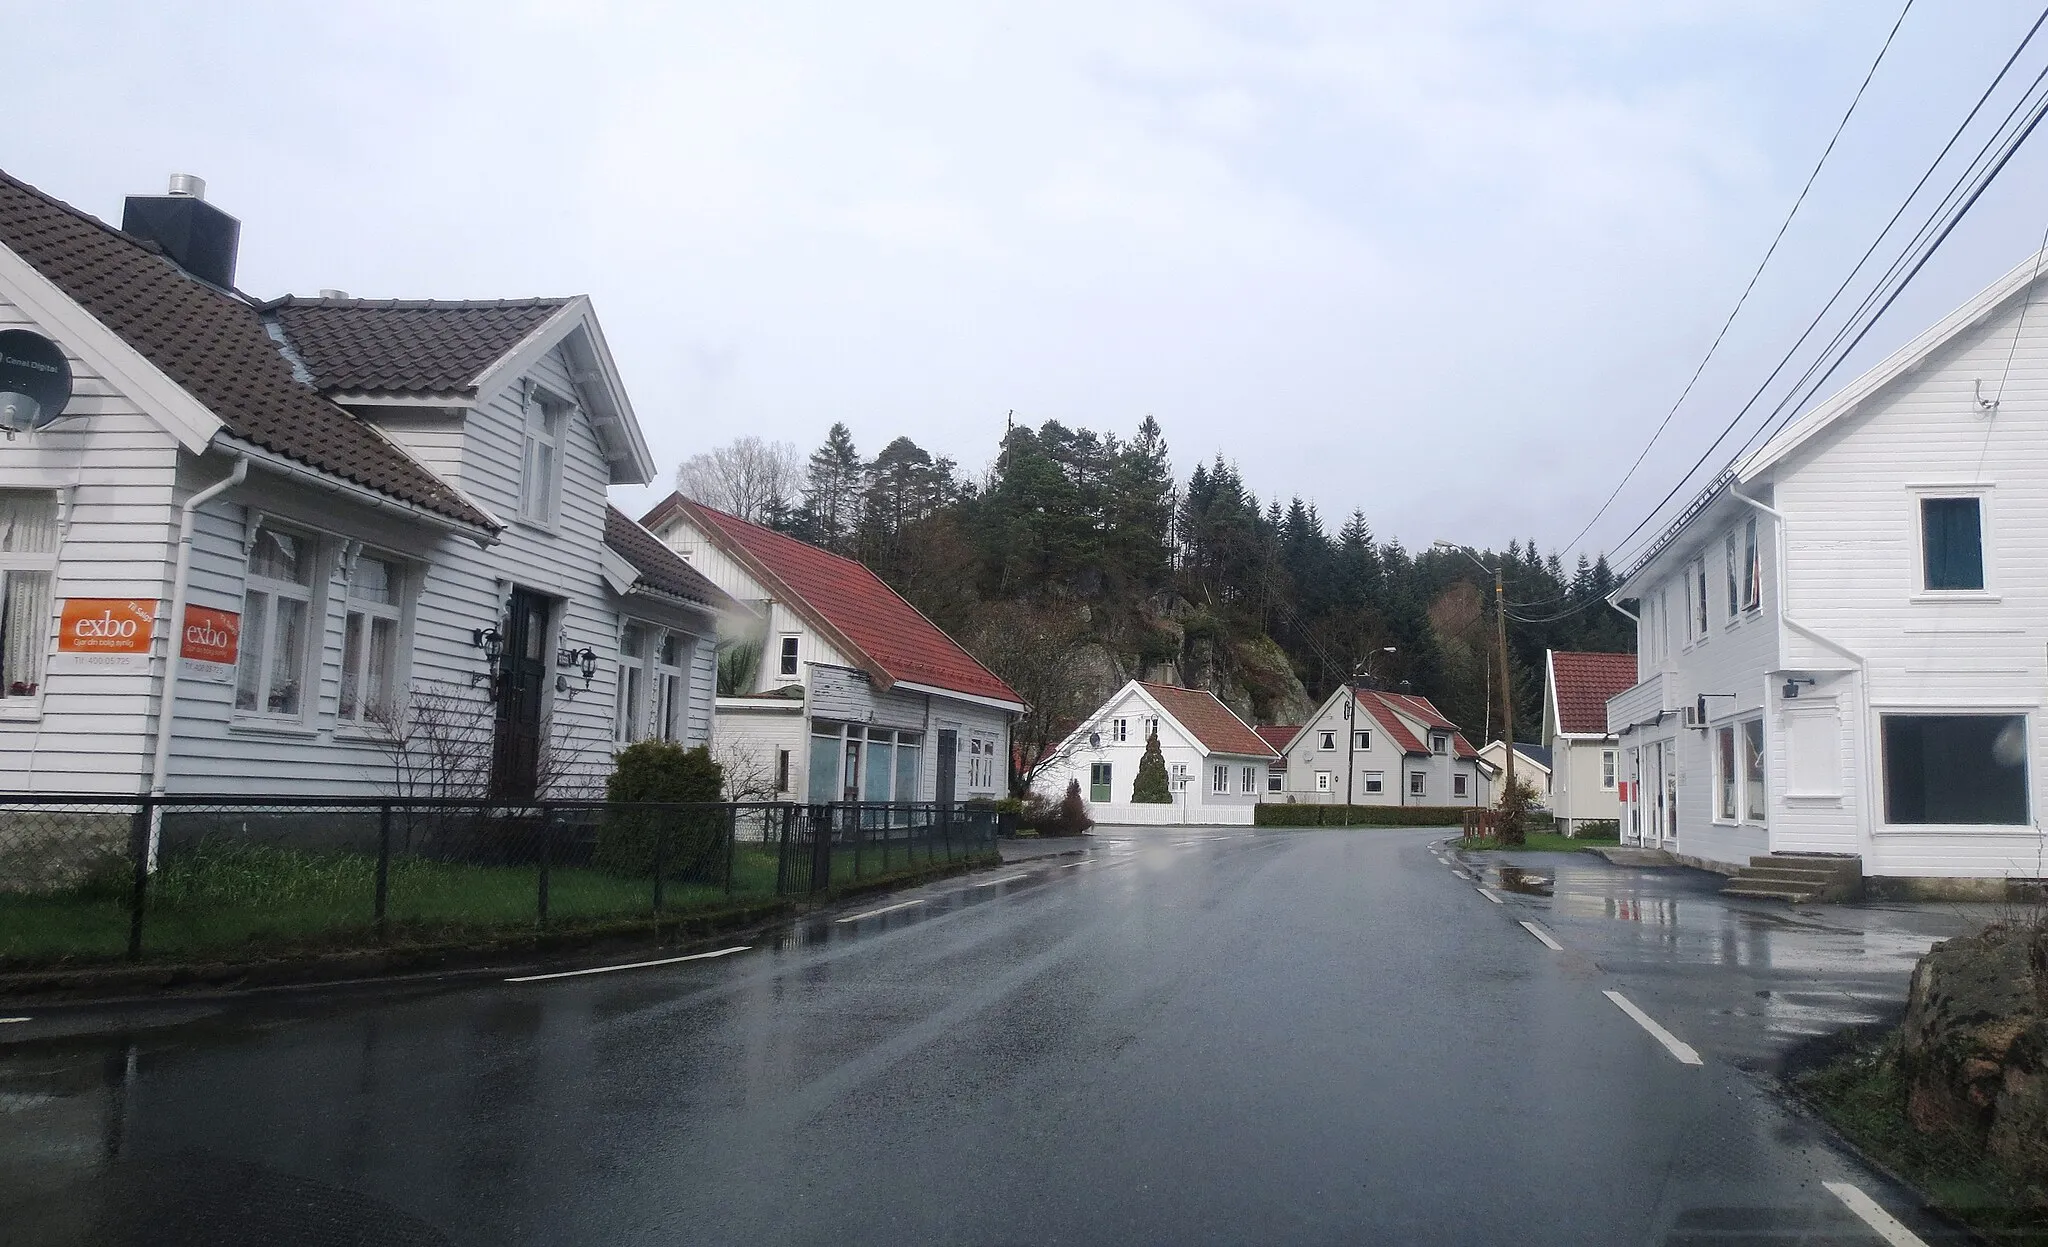 Photo showing: Houses in Krossen, the former administrative centre of the former municipality of Holum in Vest-Agder county, now located in the North Eastern part of Lindesnes Municipality, Agder County, Norway.